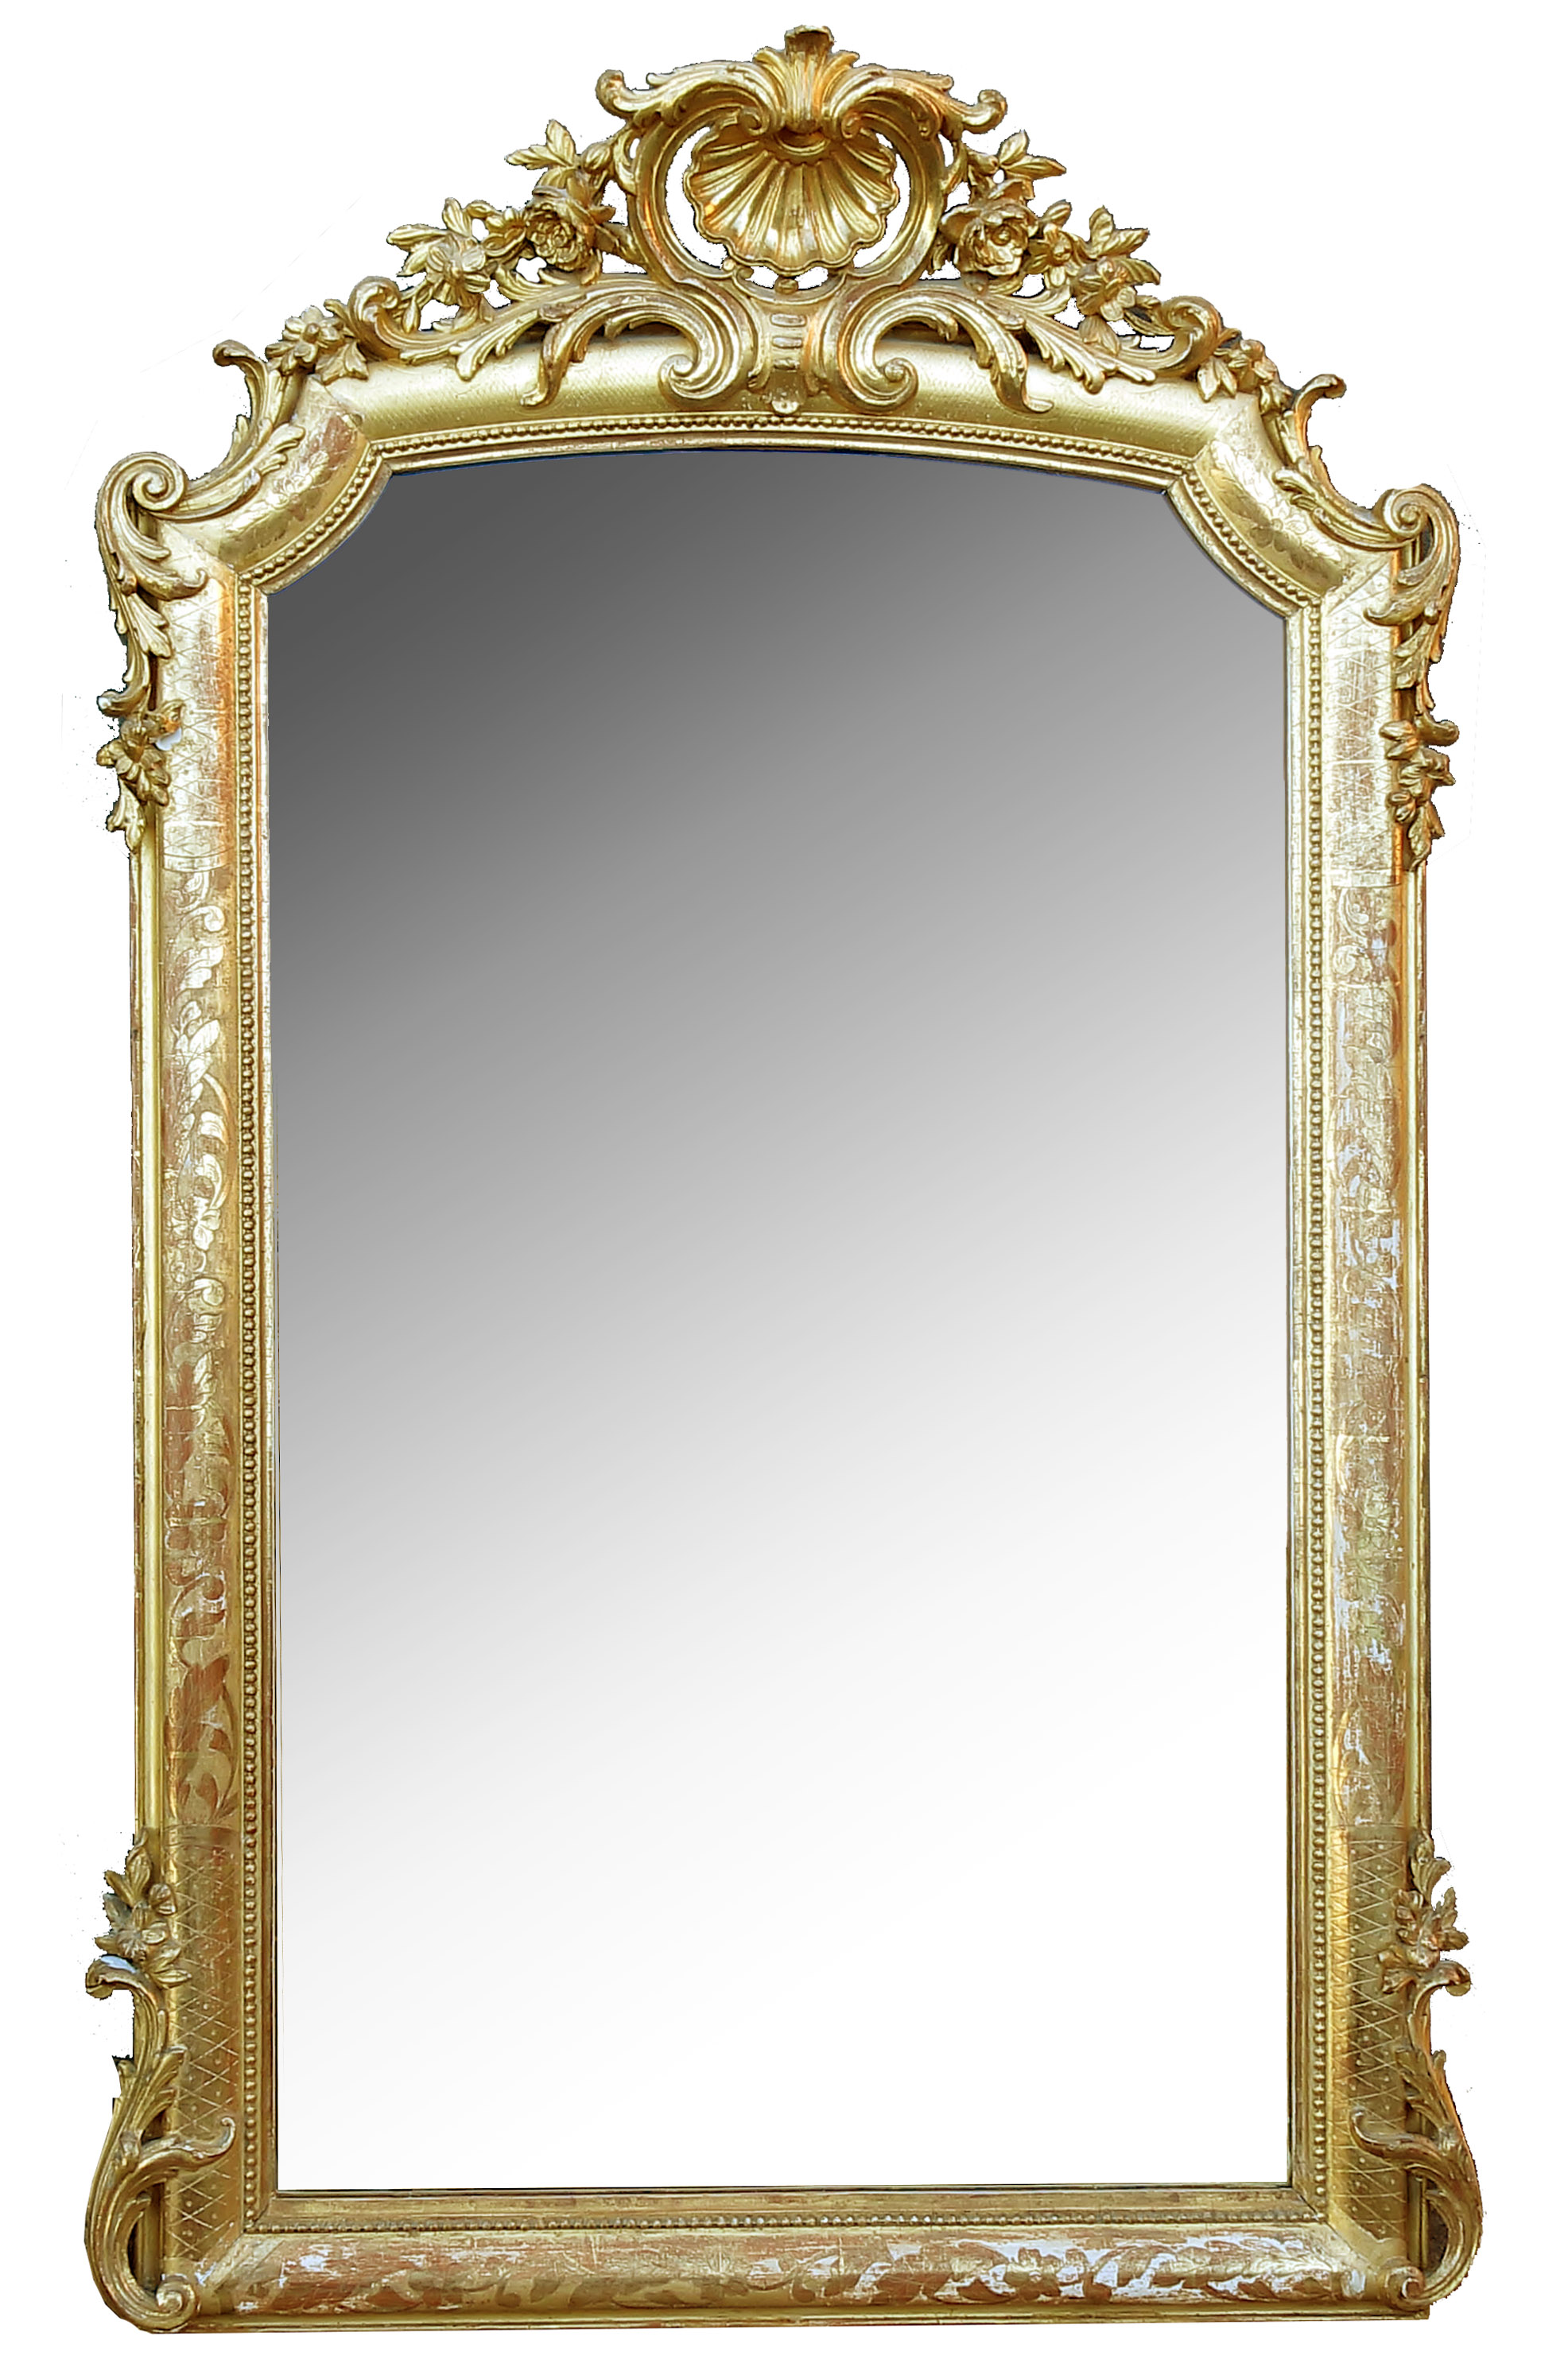 A gilt framed mirror, having ornate gilt and floral decoration, height 63ins, width 36insCondition